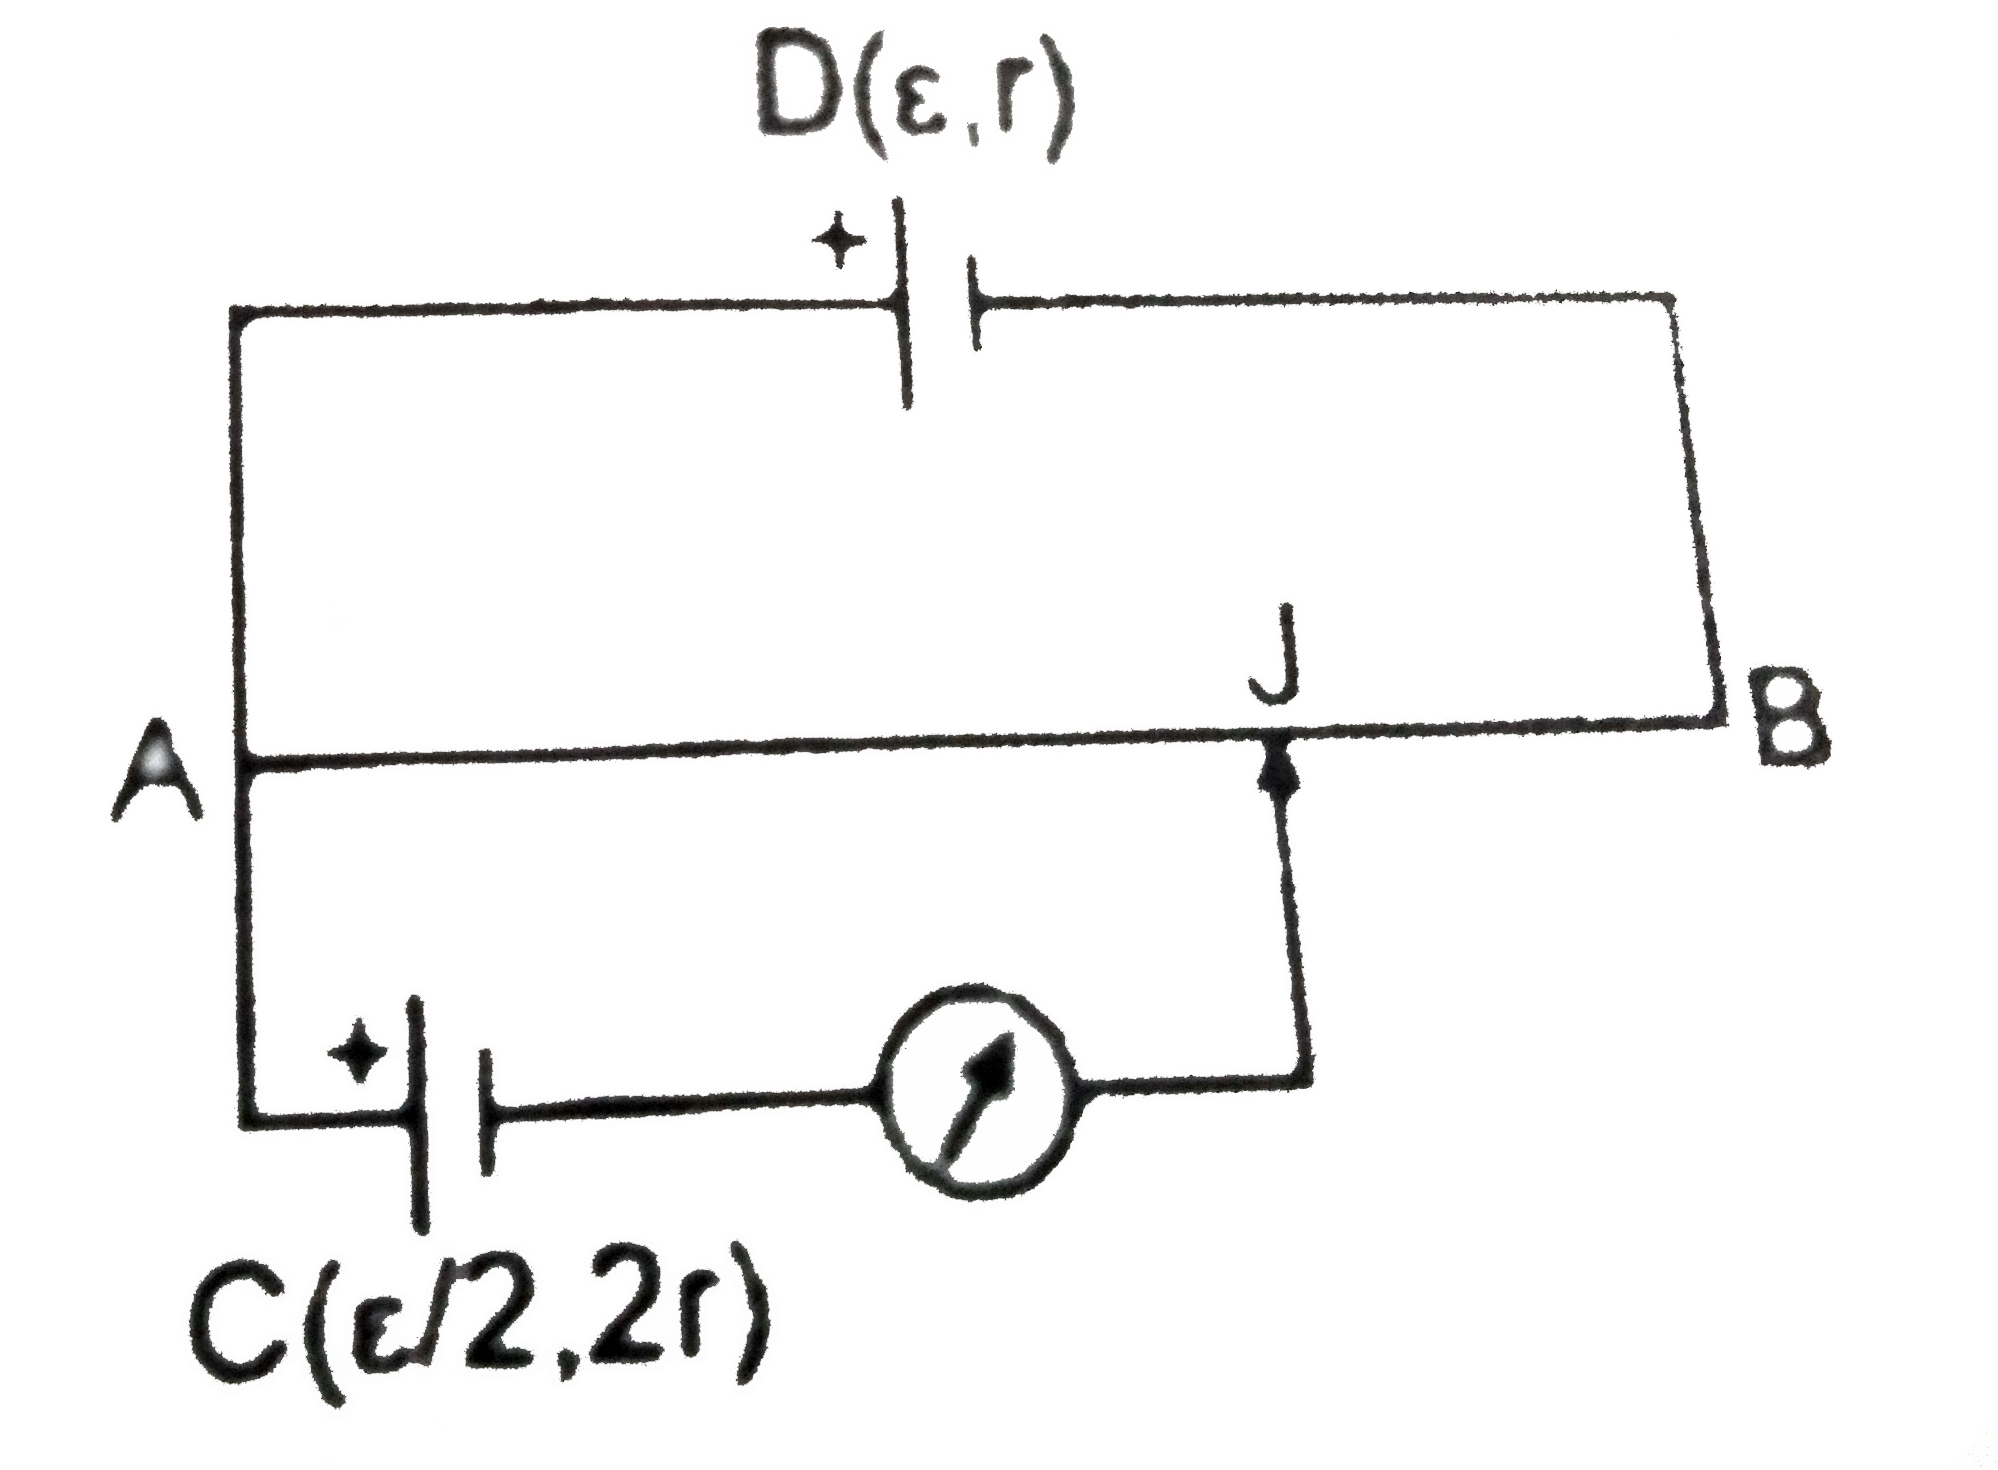 In the potentiometer arrangement shown, the driving cell D has emf epsi and internal resistance r. The cell C, whose emf is to be measured, has emf epsi//2 and internal resistance 2r. The potentiometer wire is 100-cm long. If balance is obtained at the langth AJ=l.